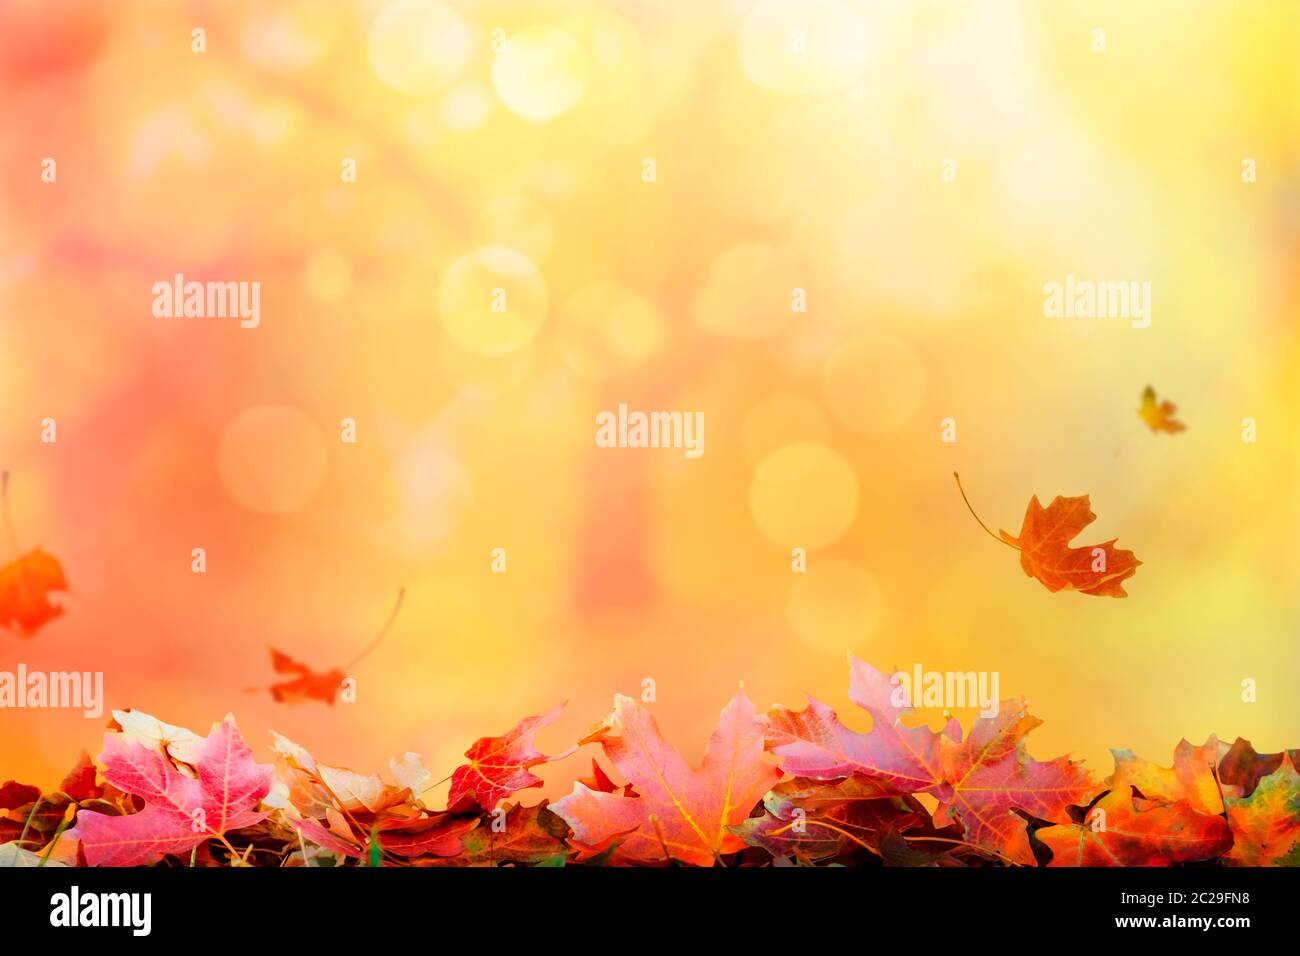 Autumn background with falling leaves Stock Photo